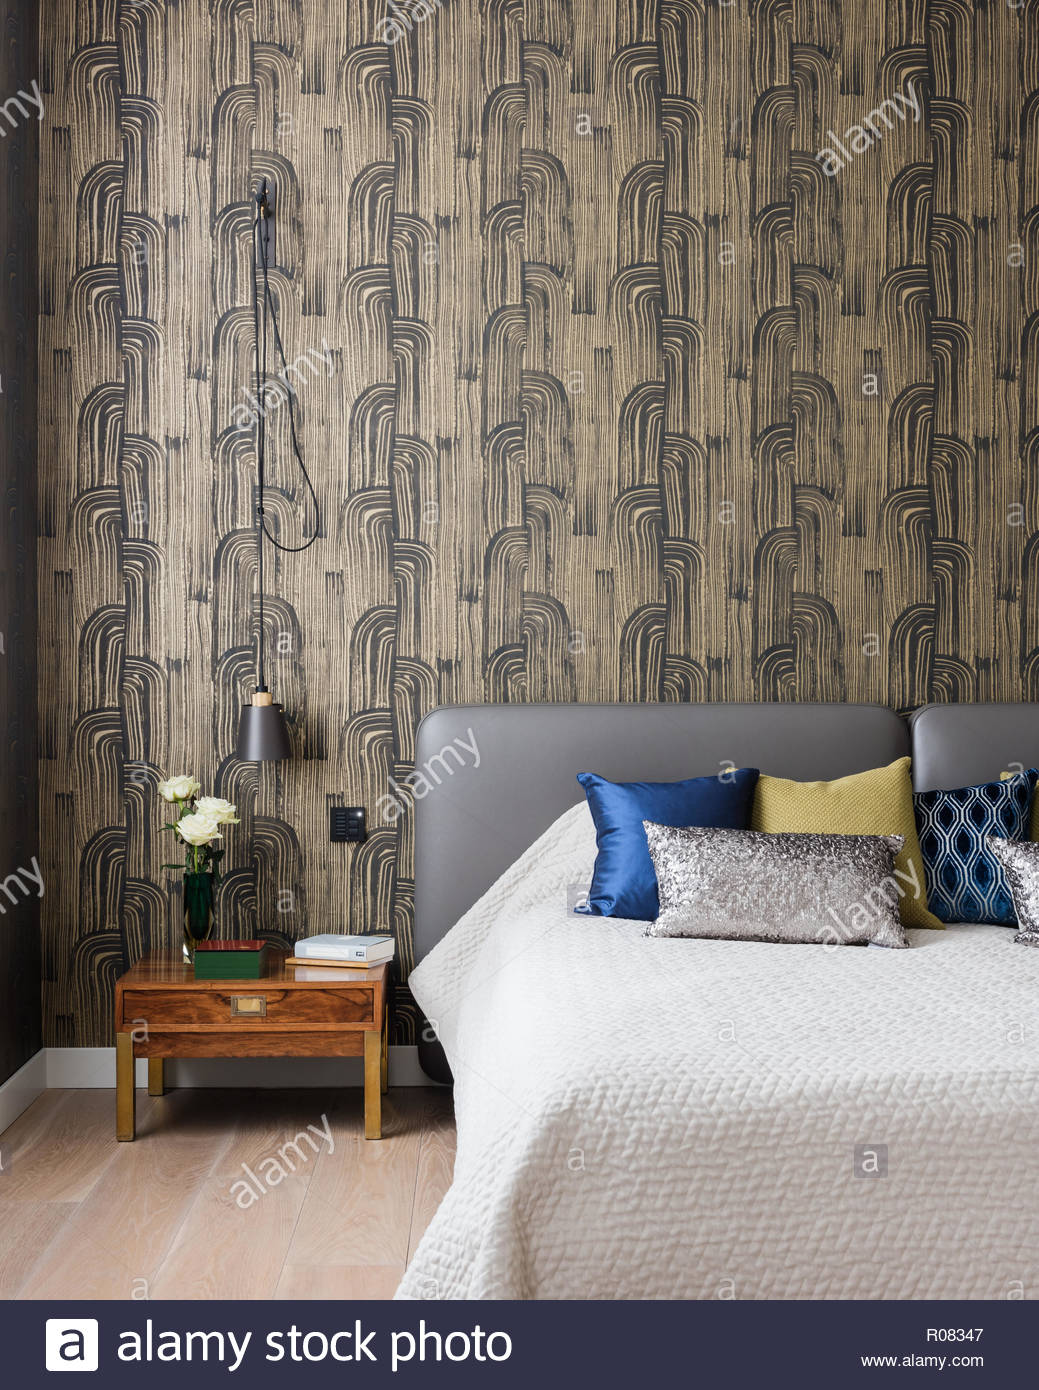 Modern Bedroom With Patterned Wallpaper Stock Photo